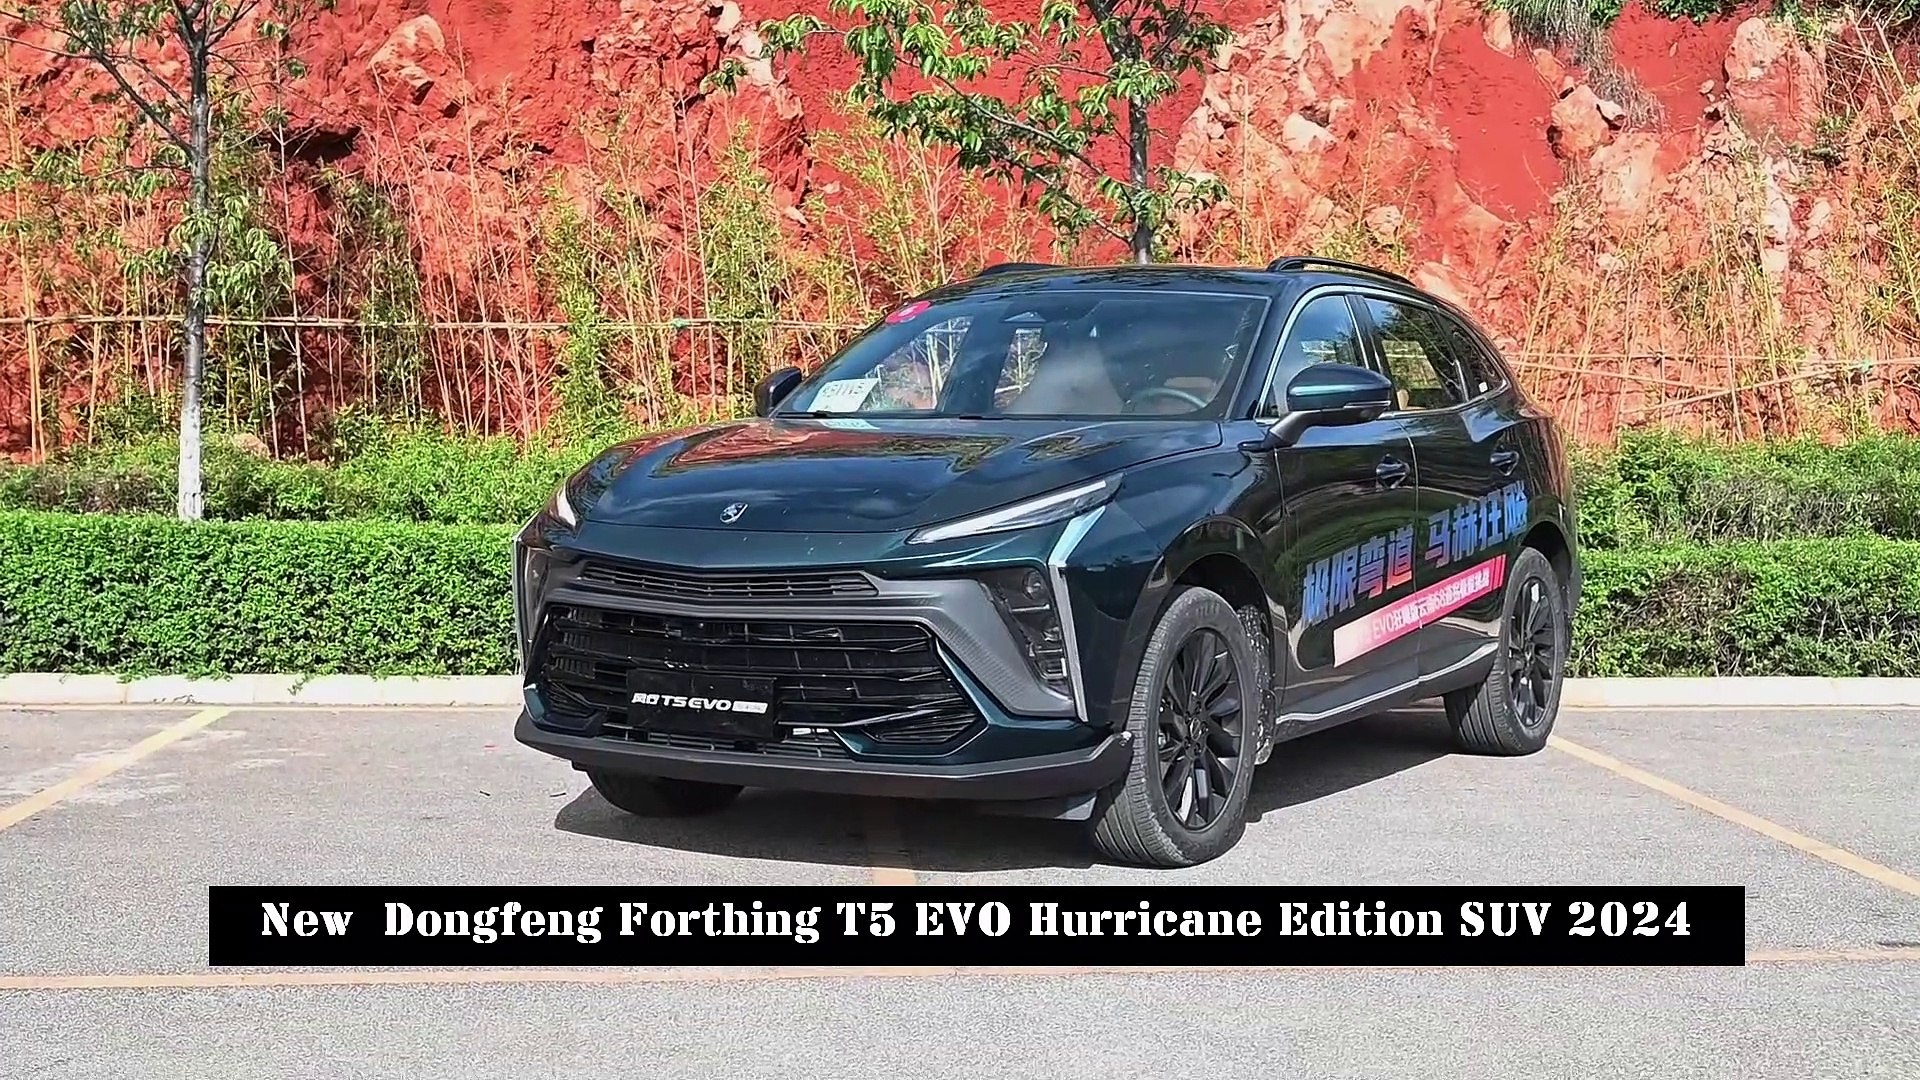 New Dongfeng Forthing T5 EVO Hurricane Edition SUV 2024